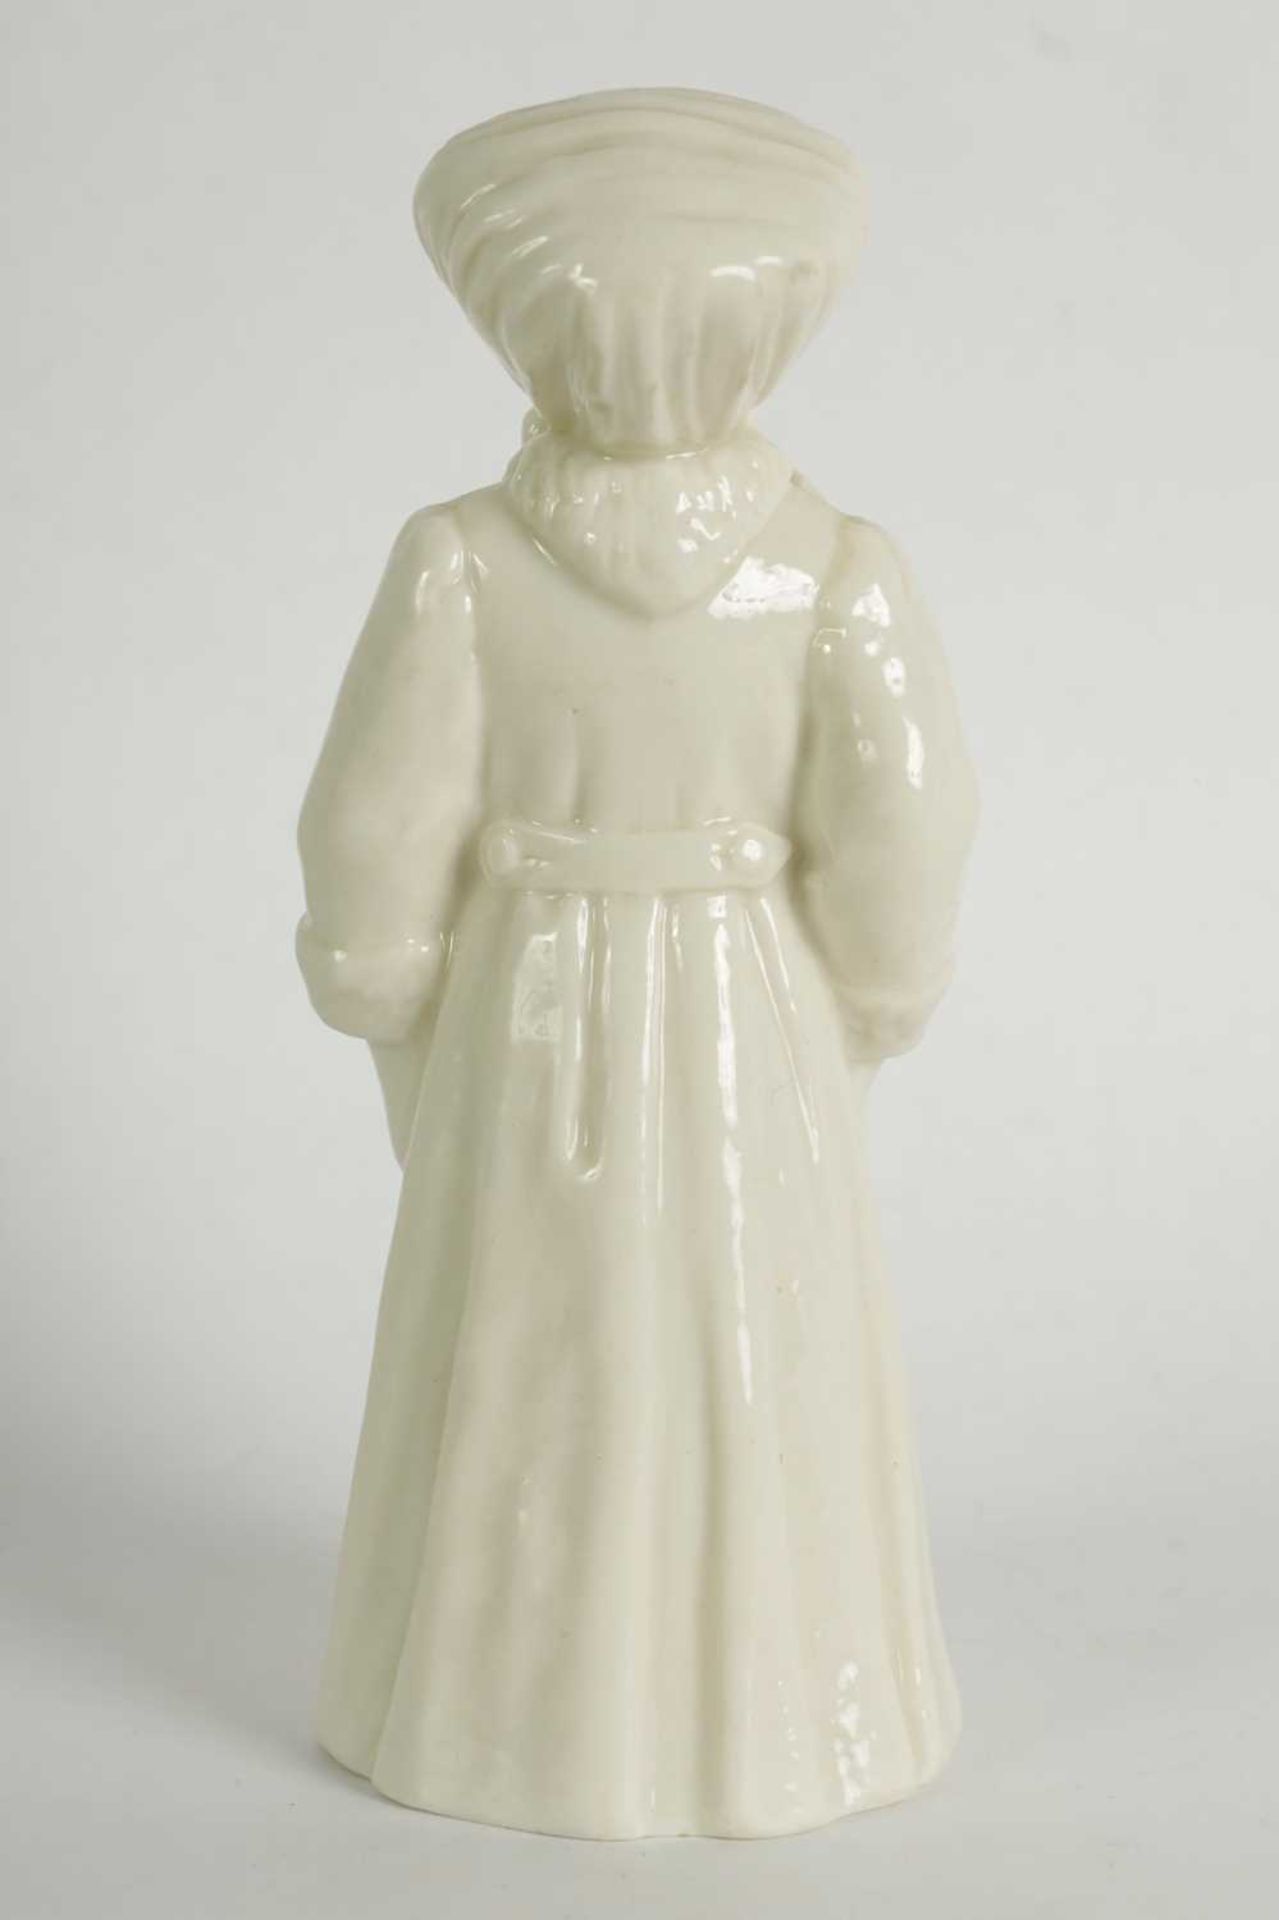 THE MOTORIST. A VERY RARE ROYAL WORCESTER PORCELAIN CANDLE EXTINGUISHER - Image 2 of 6